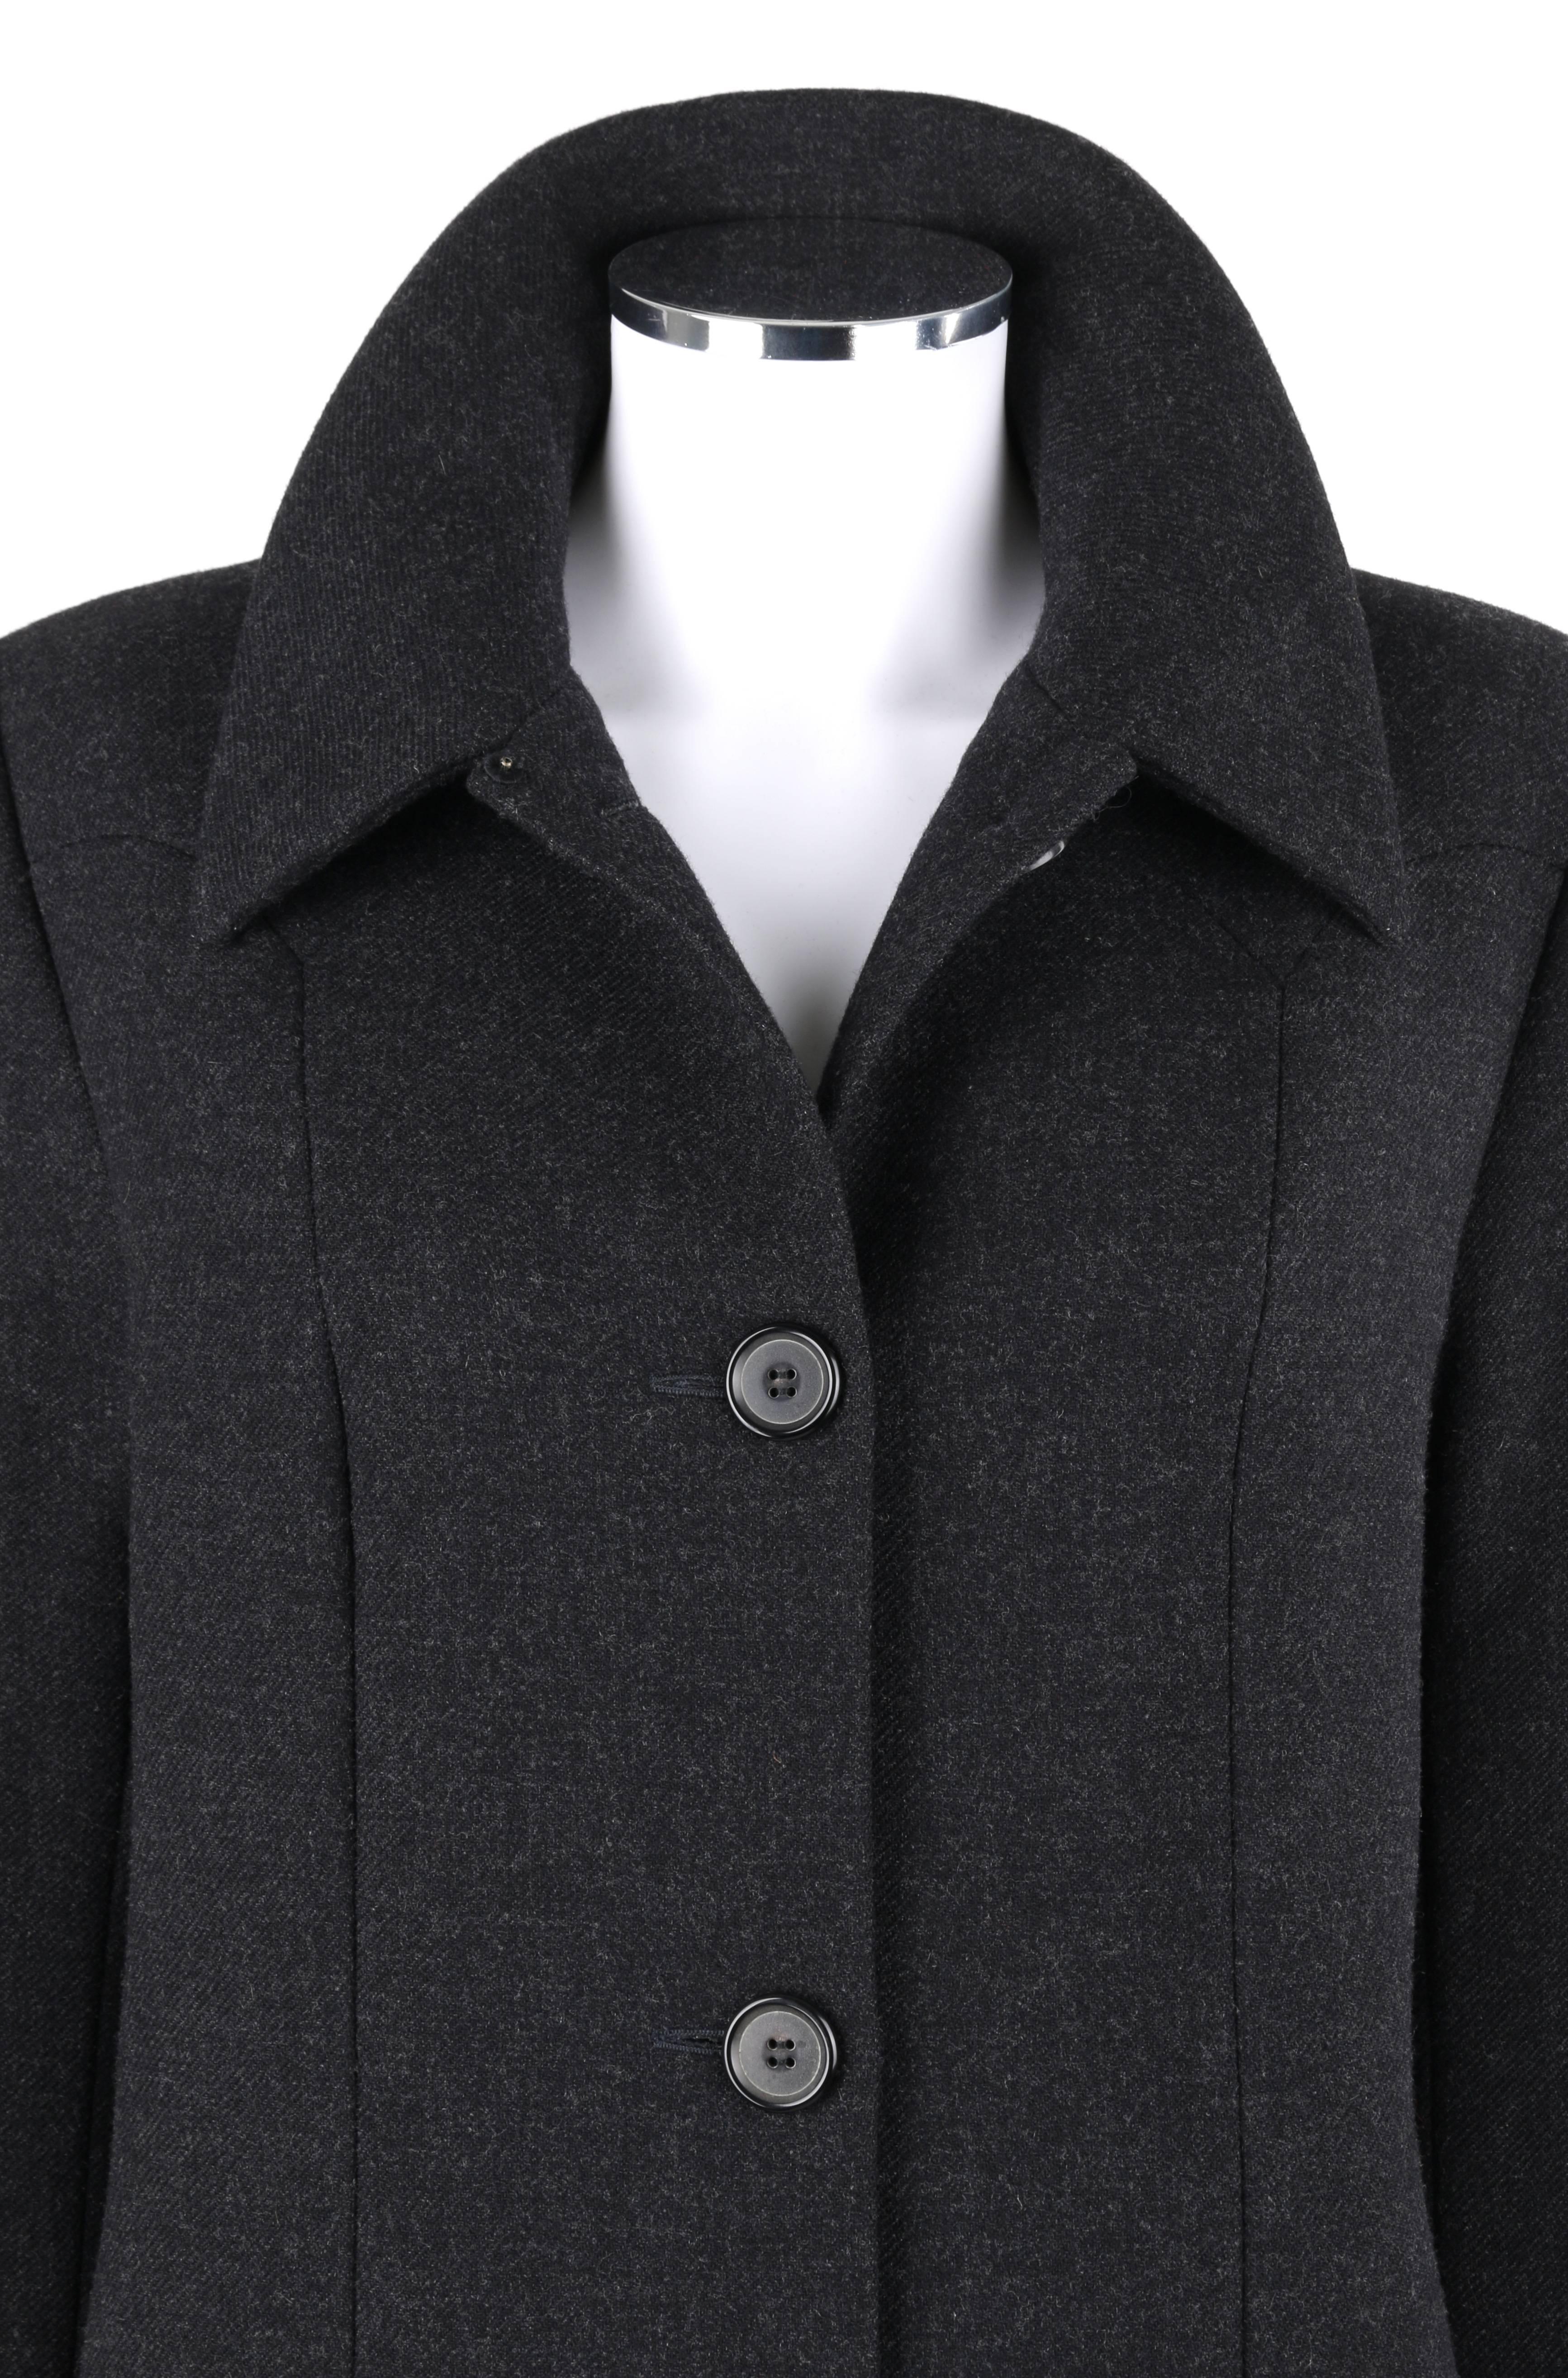 Women's GIVENCHY Couture A/W 1998 ALEXANDER McQUEEN Charcoal Gray Wool Coat Overcoat For Sale